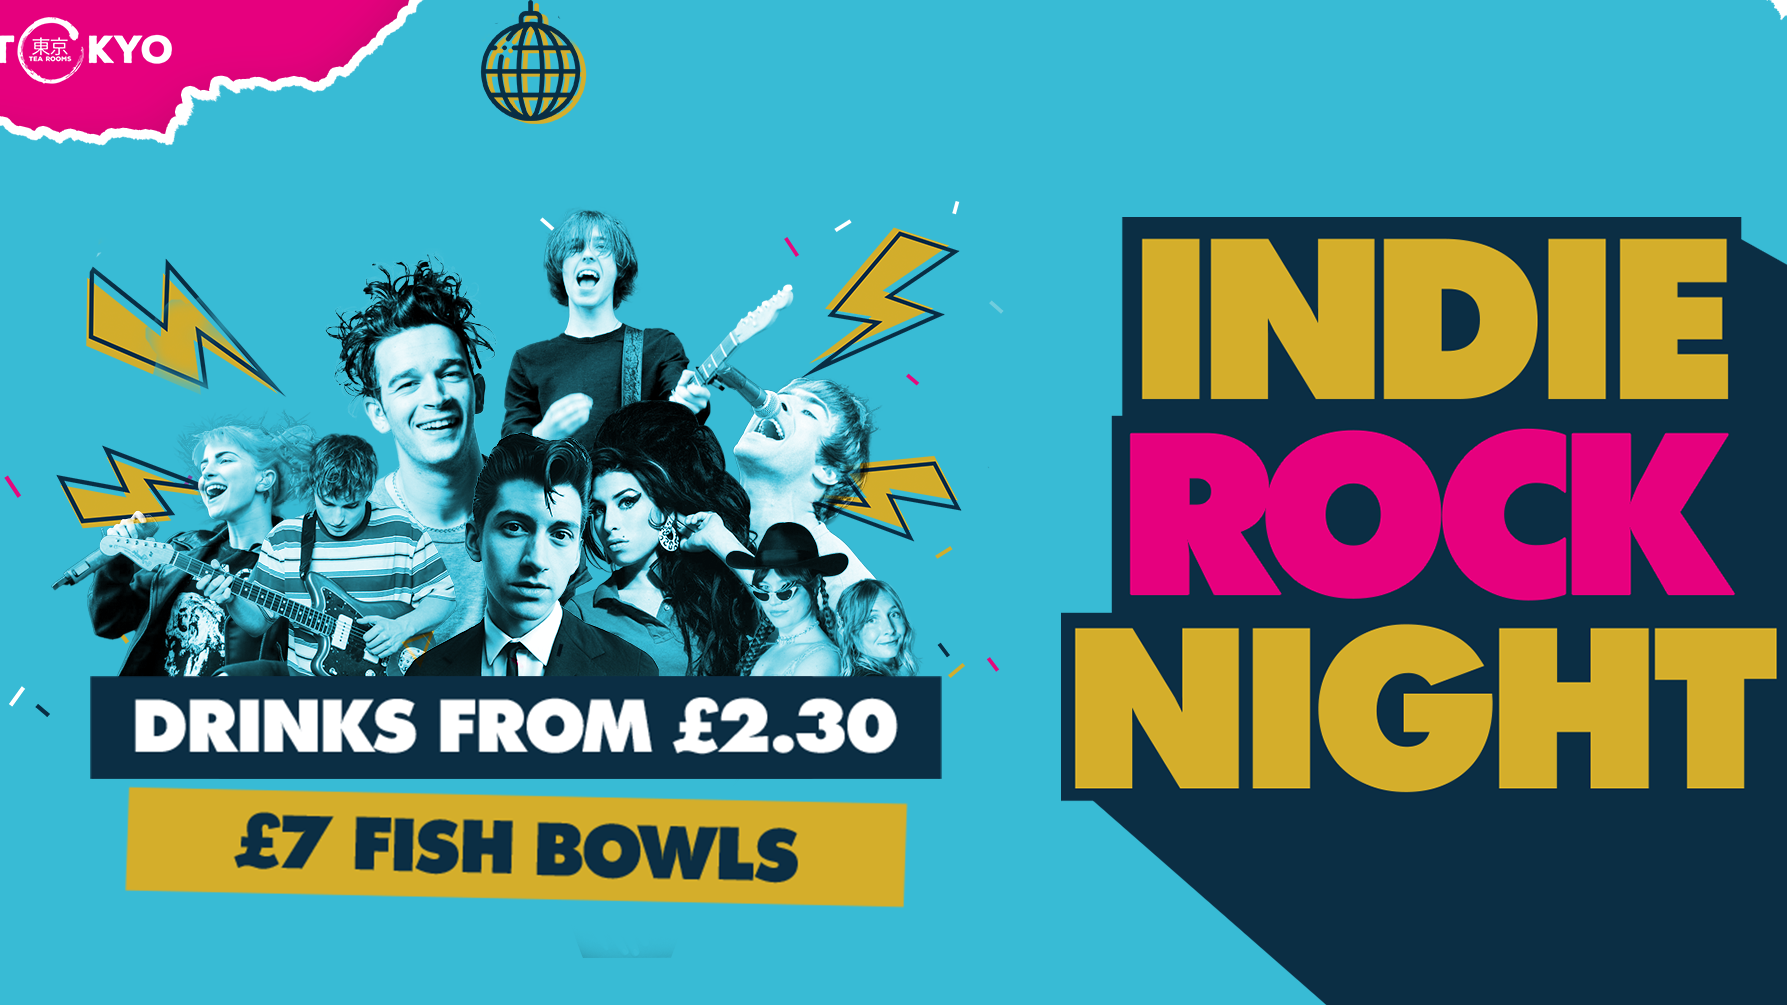 Indie Rock Night ∙ EASTER THURSDAY *ONLY 8 £2 TICKETS LEFT*